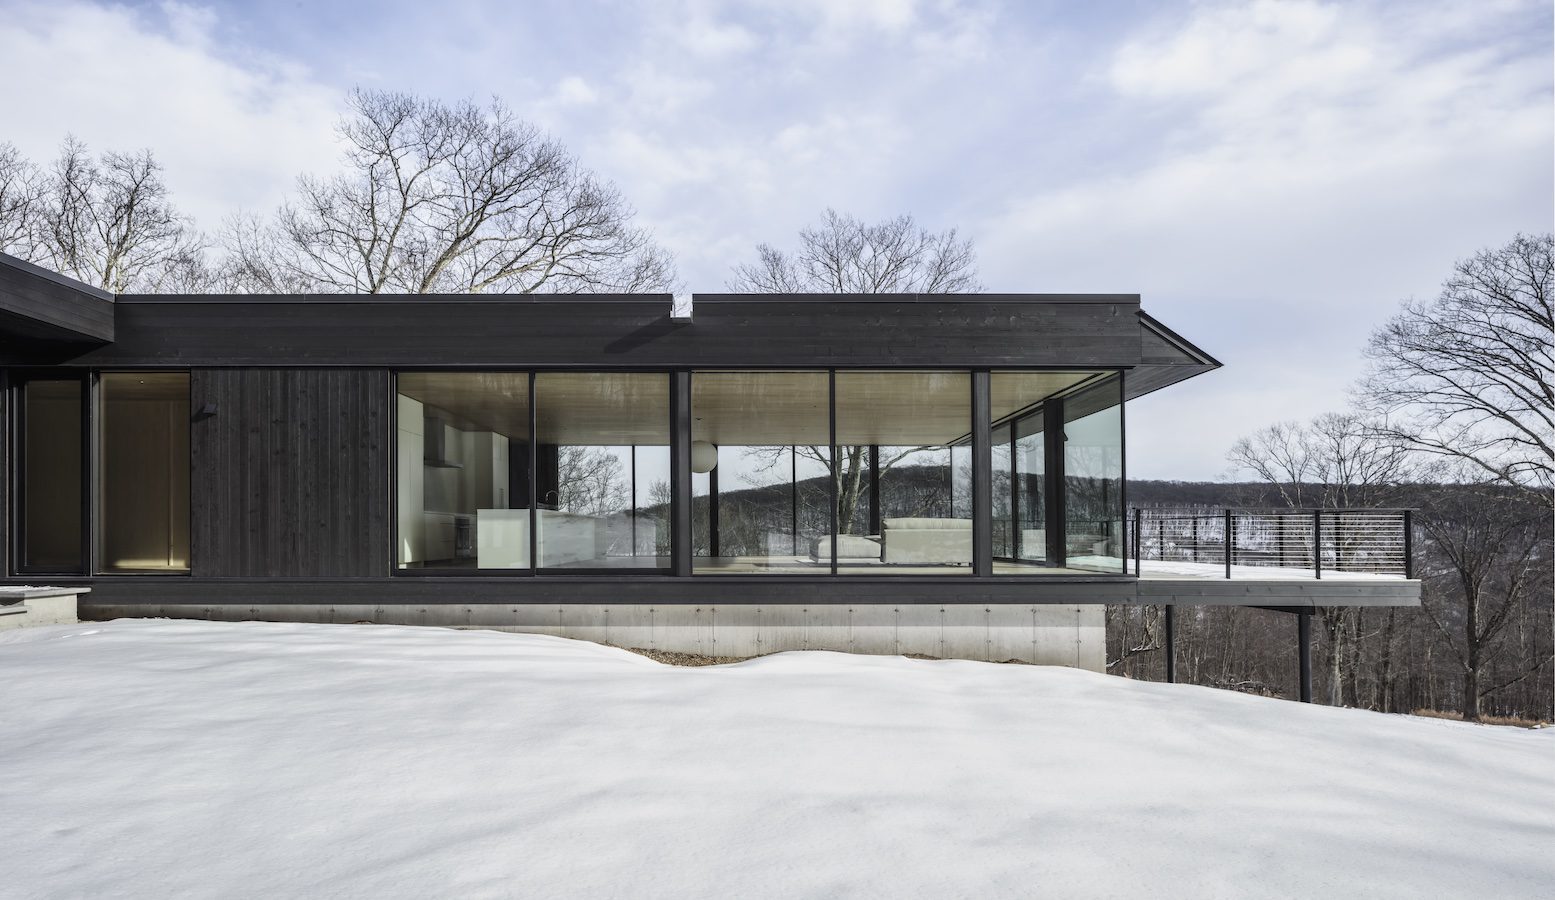 Residential: A modern black house sits on a snowy hillside, showcasing exemplary residential structural design.